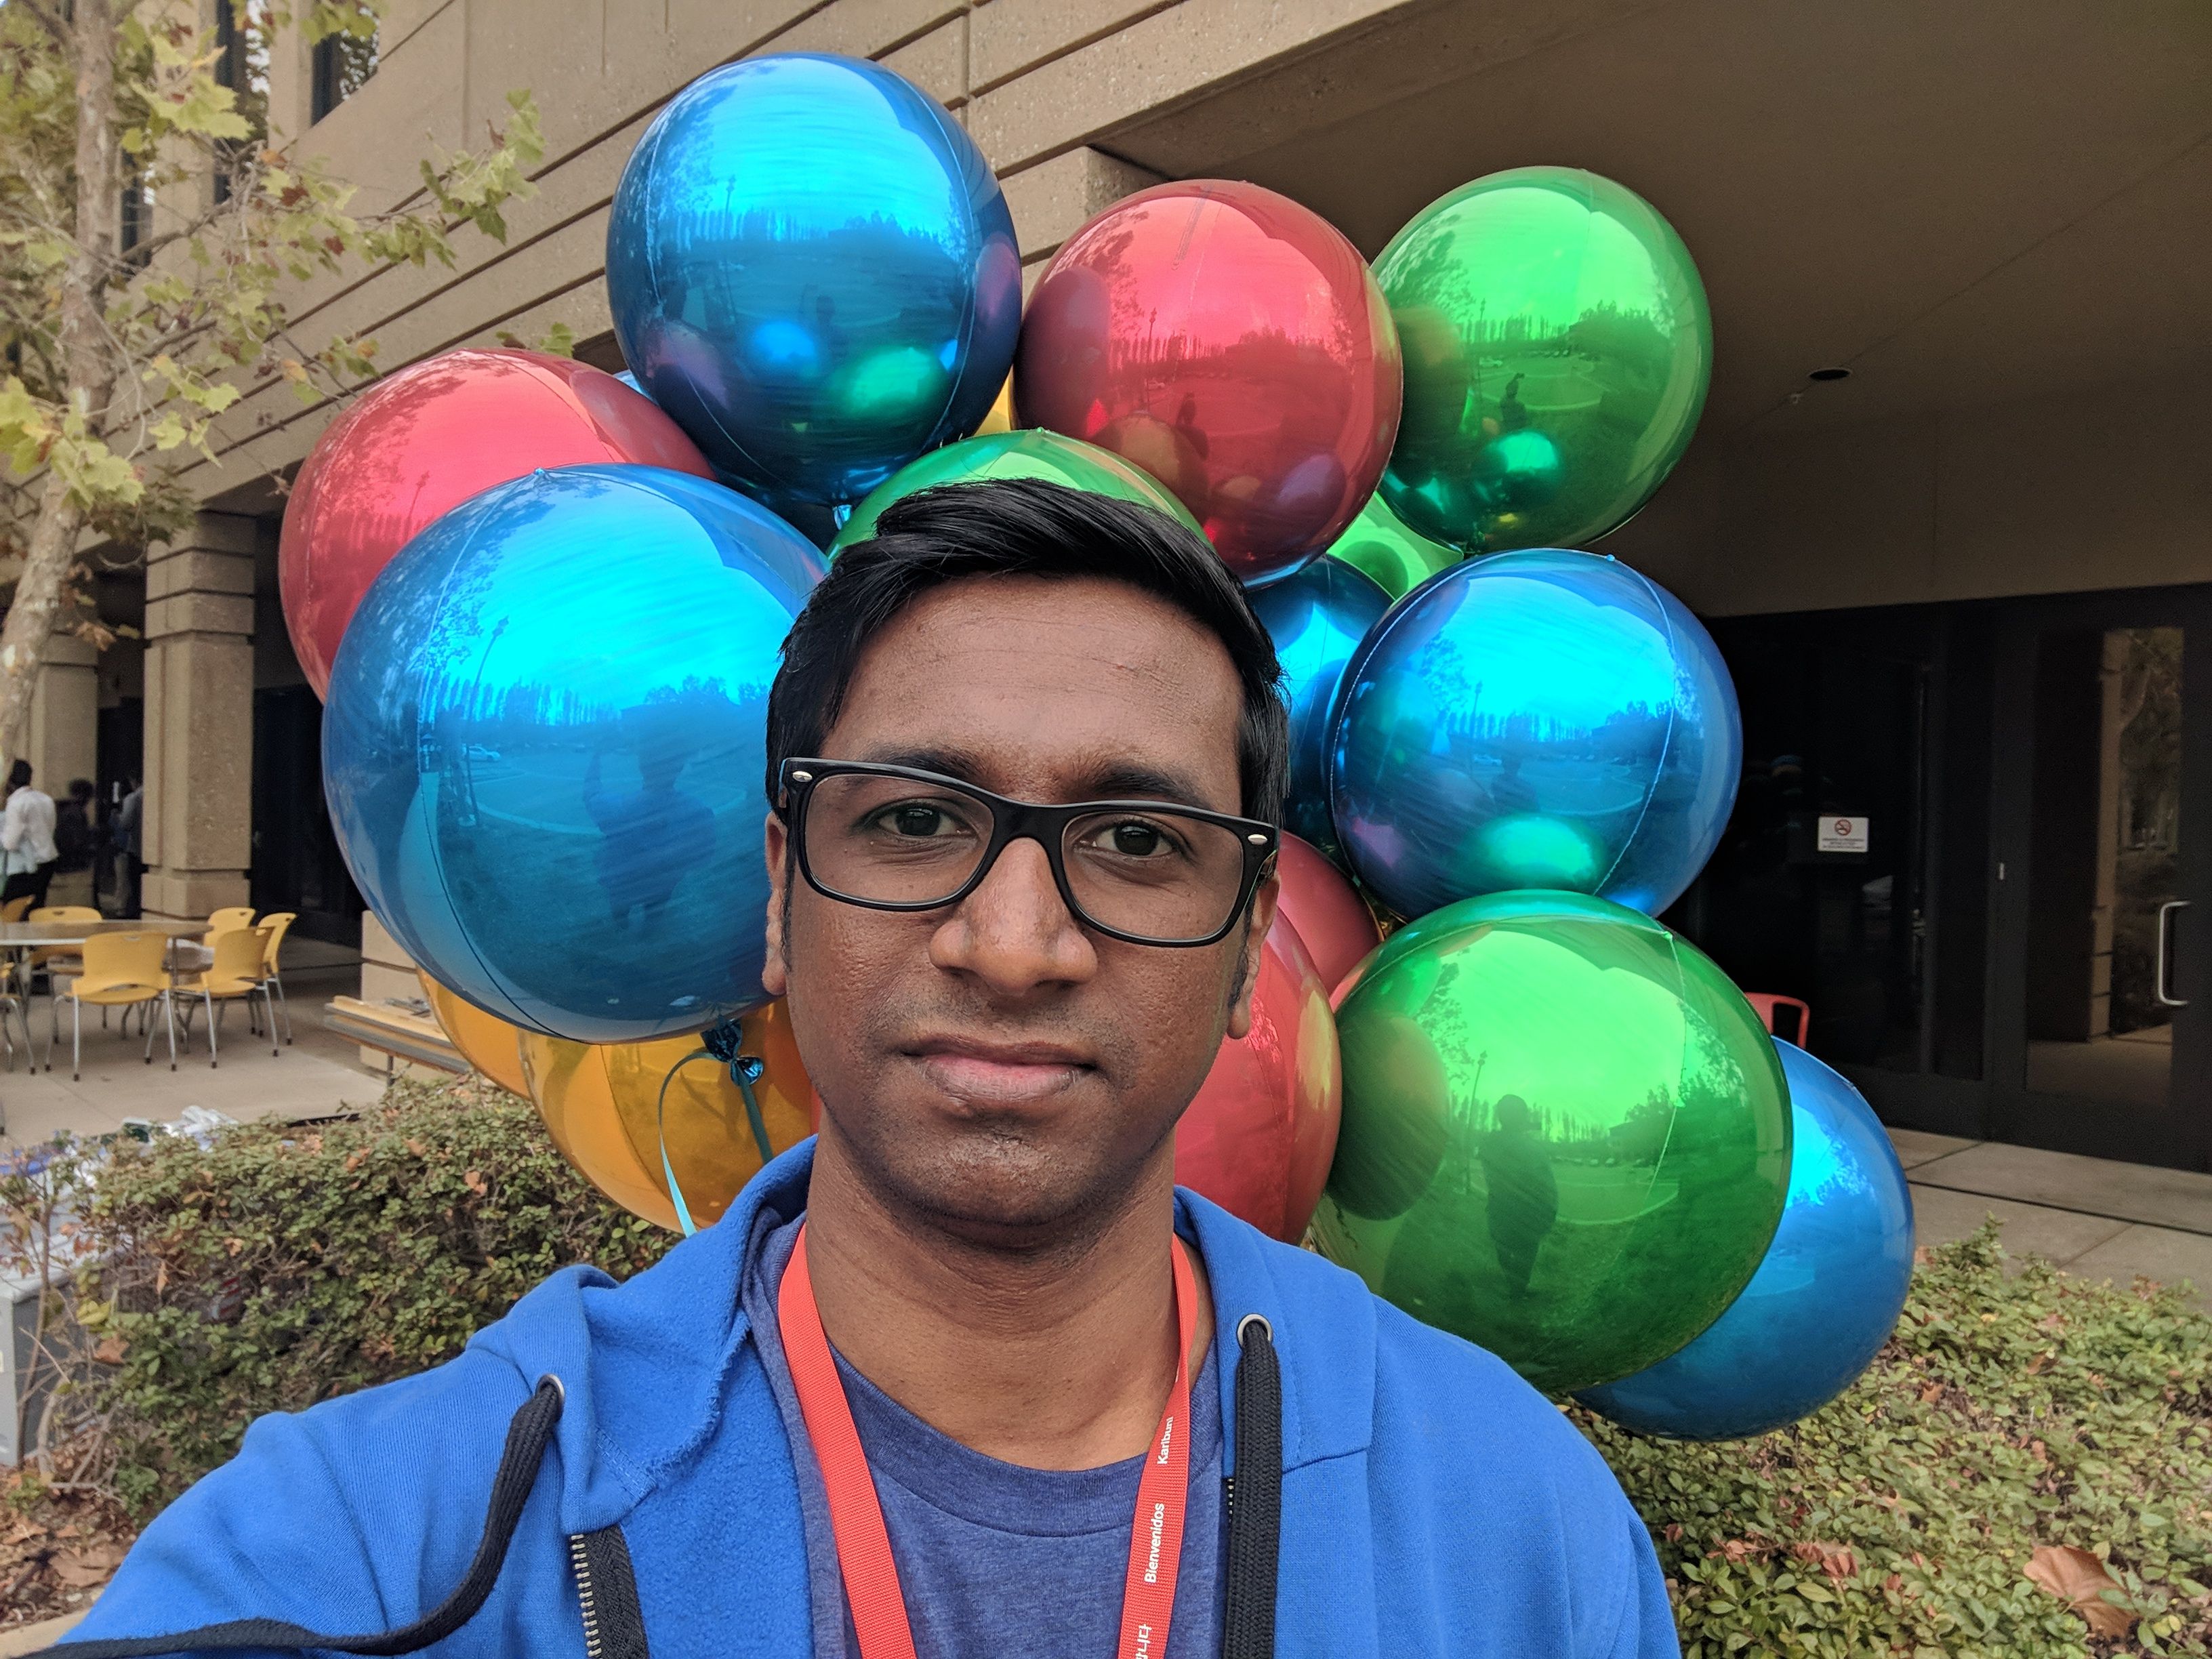 Caption: A photo of Local Guide @IlankovanT standing in front of blue, red, green, and yellow balloons taken outdoors at Connect Live 2018. (Local Guide @IlankovanT)